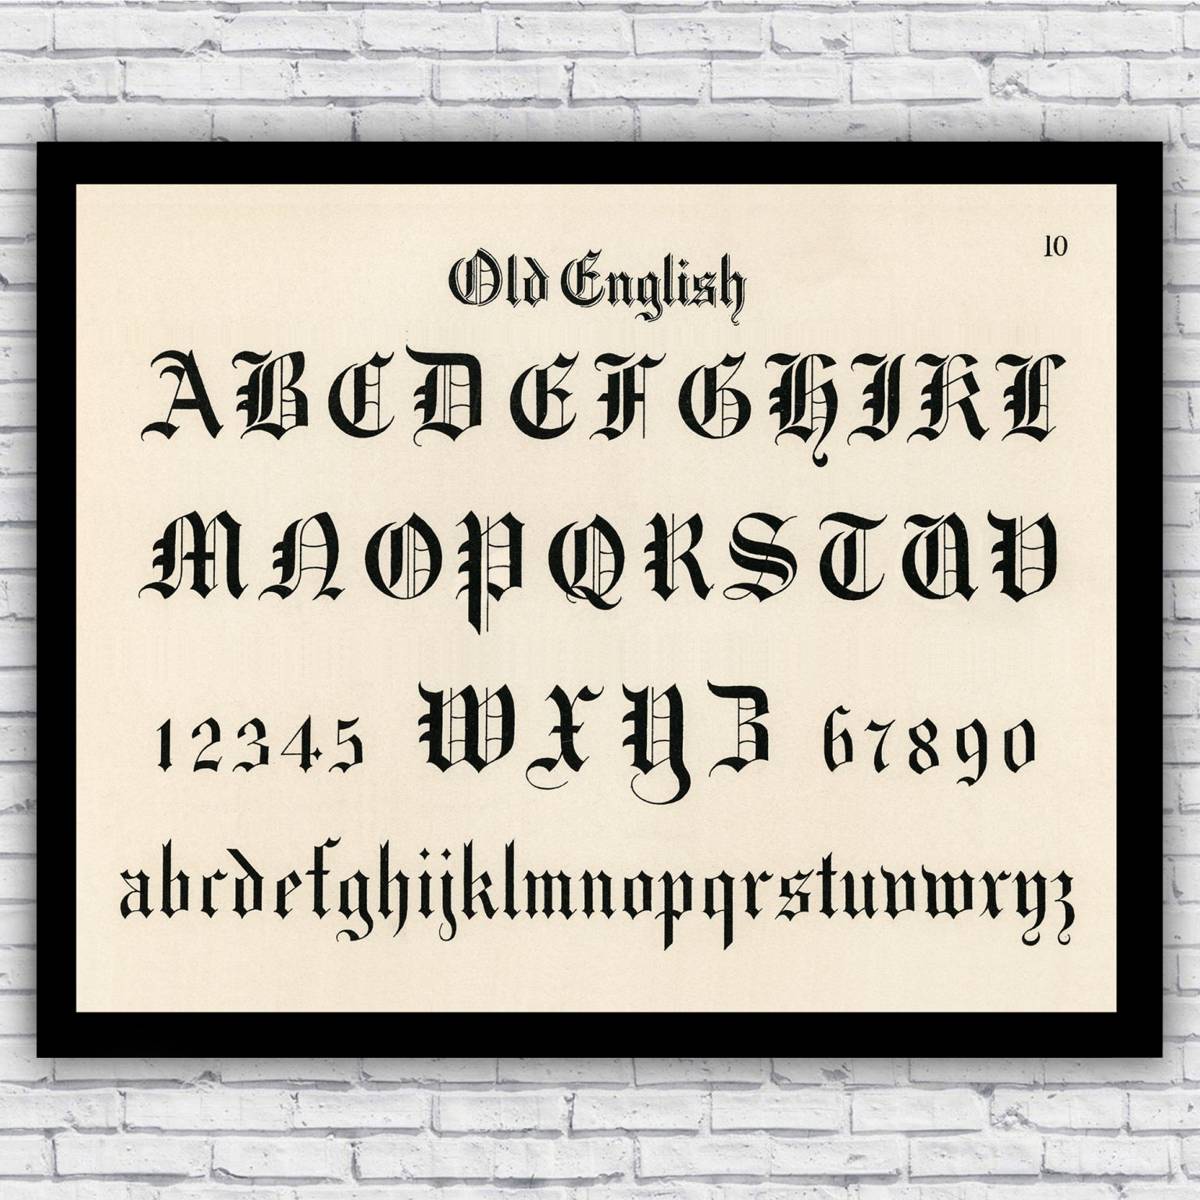 Old English Alphabet Lettering Typography - Wall Art Repro Print Decor ...